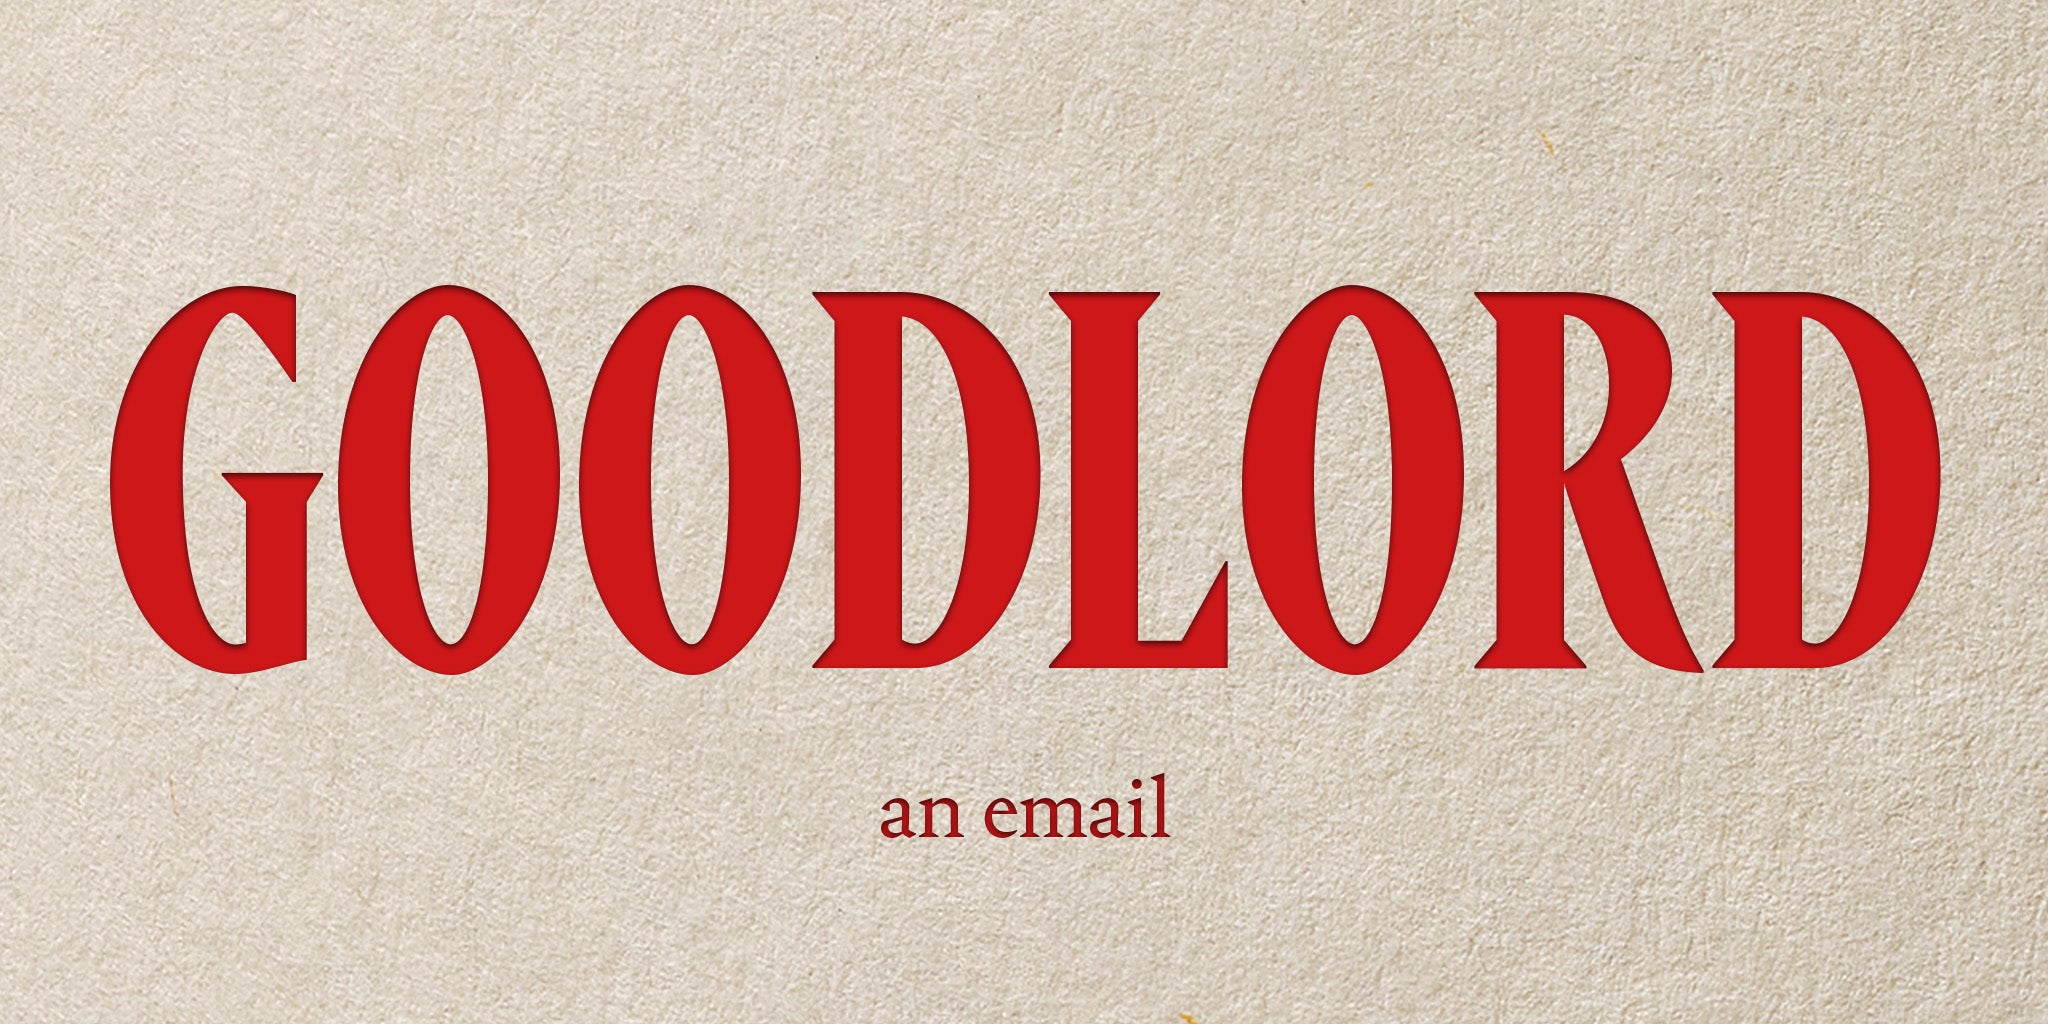 Goodlord: An Email - Ella Frears